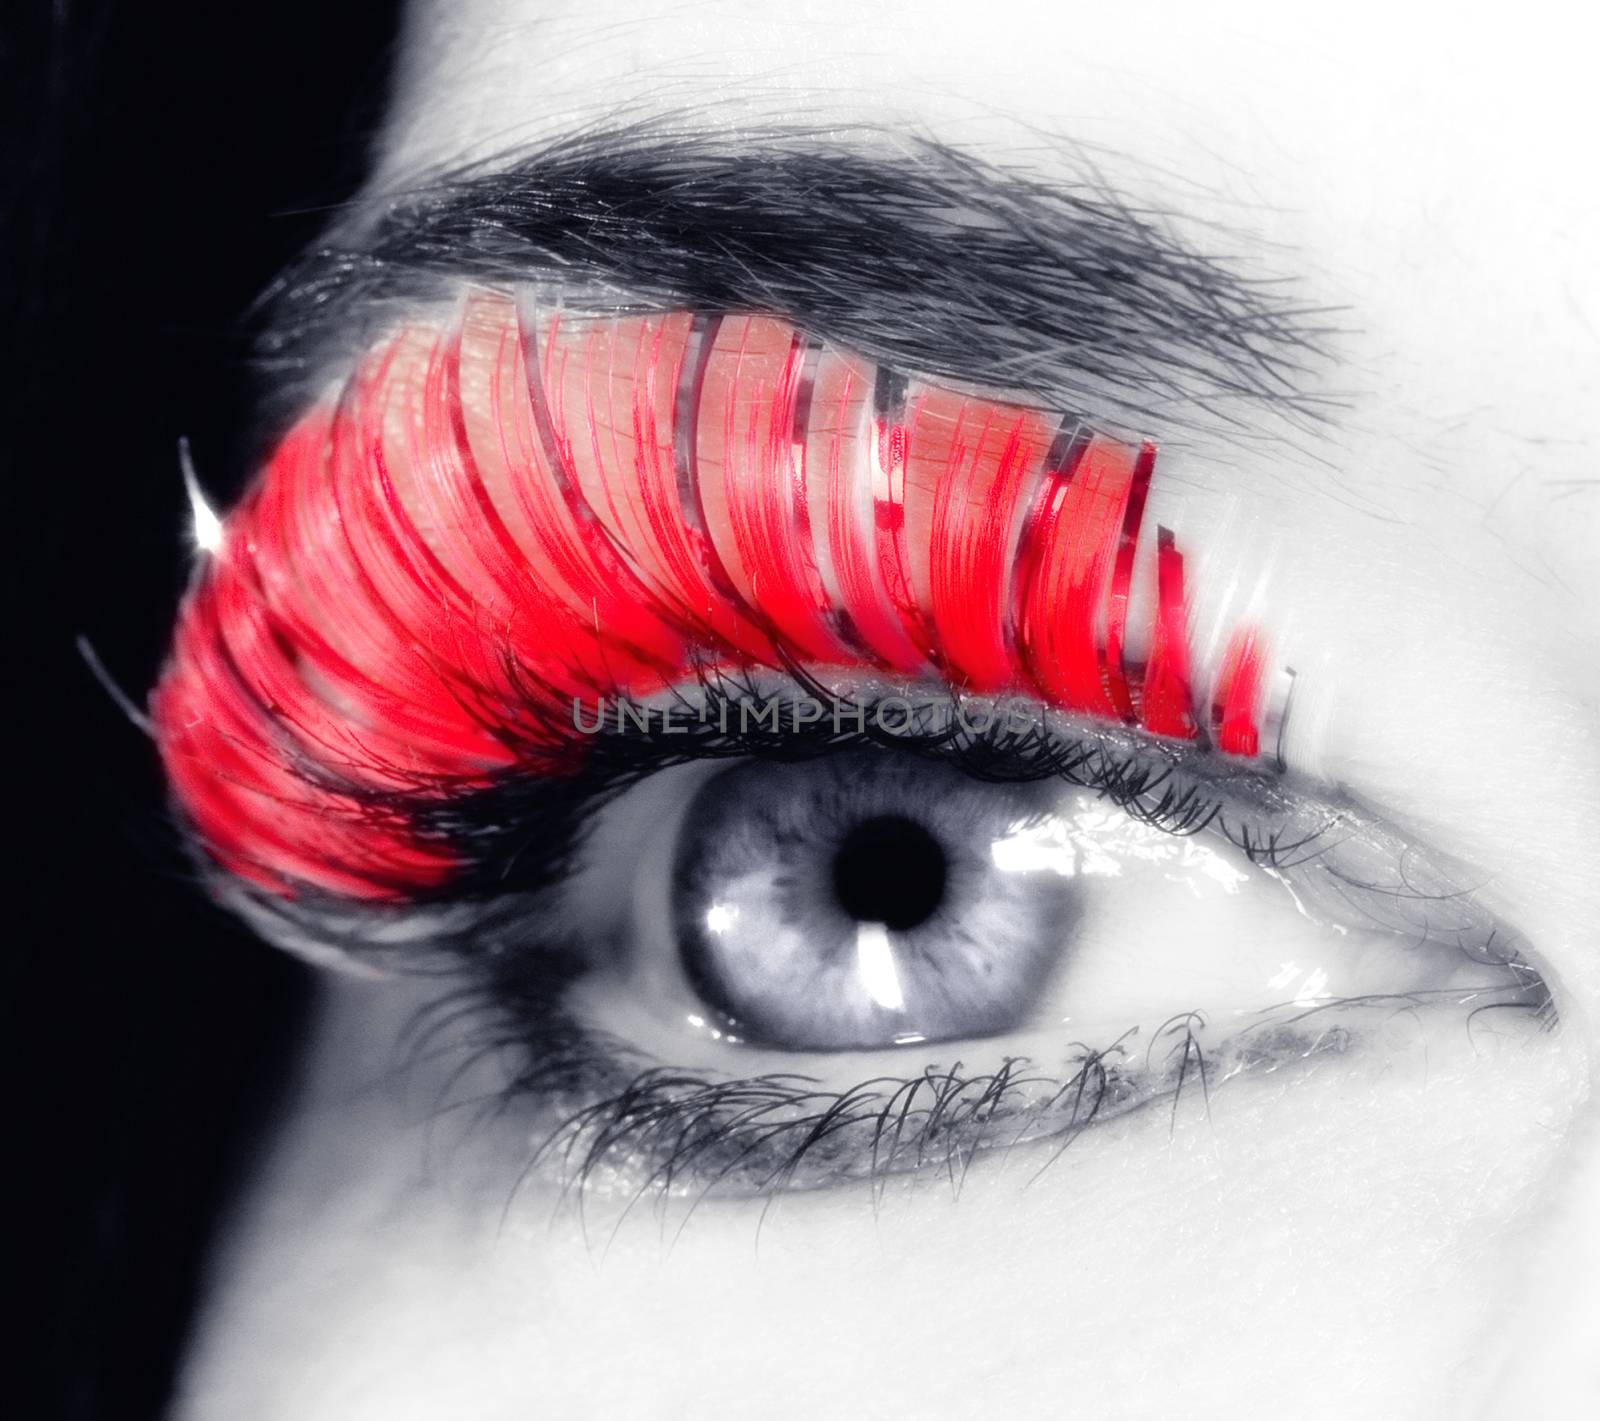 Extreme Closeup of an Eye with Long Red Eyelashes